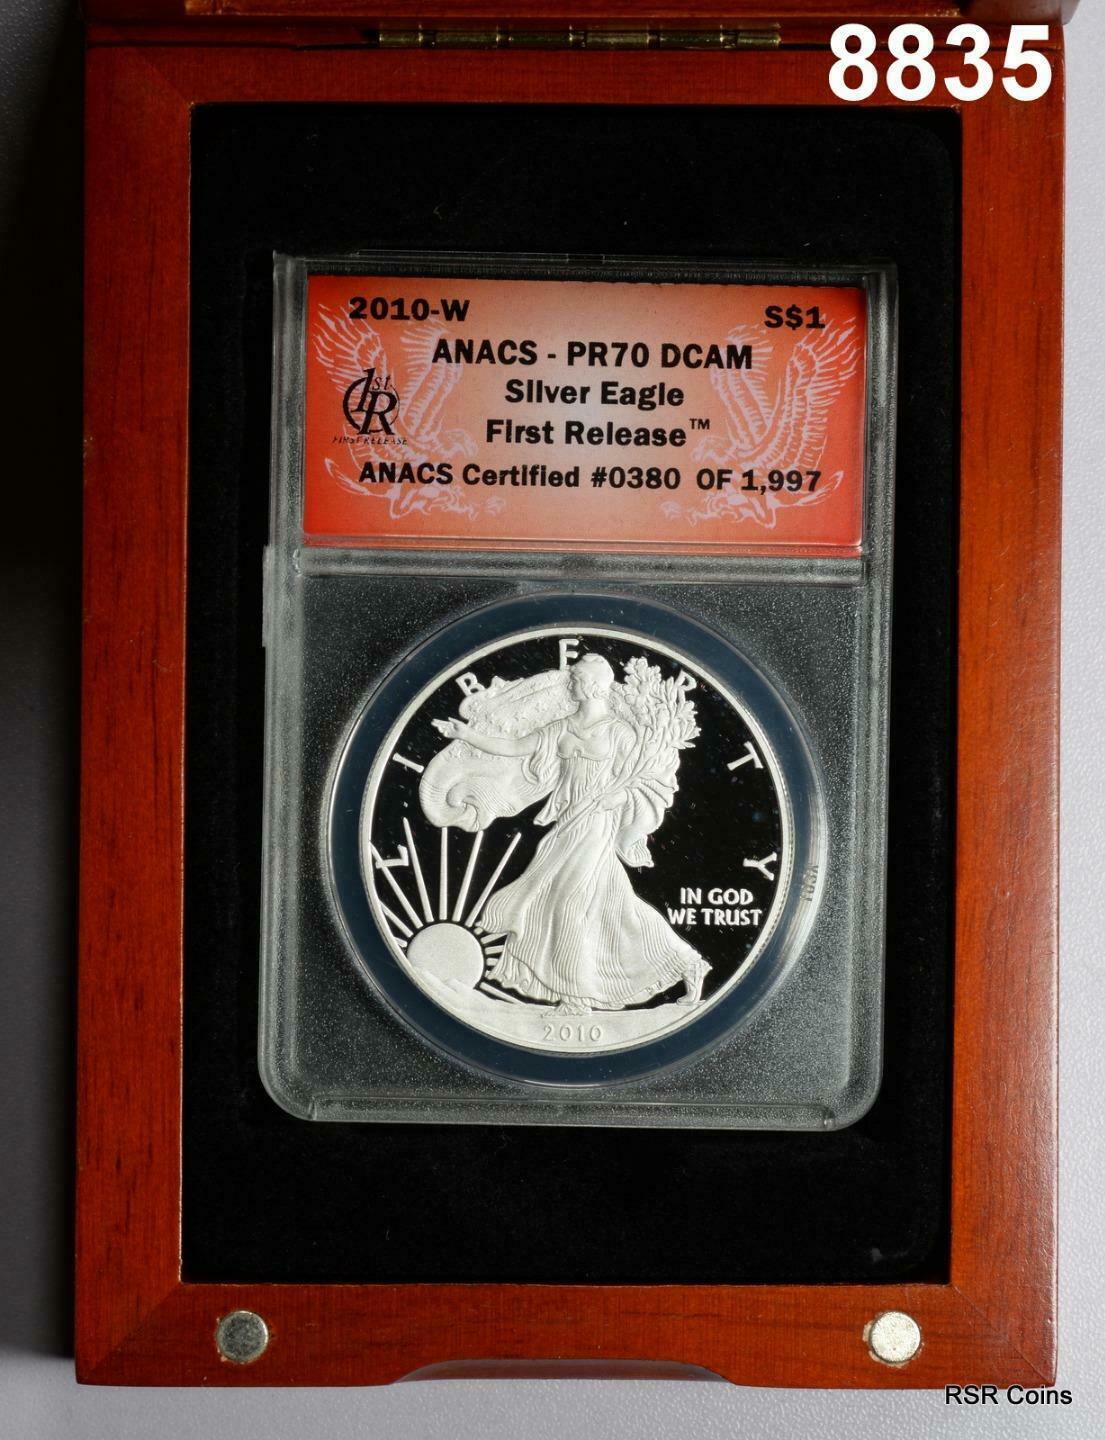 2010 W SILVER EAGLE FIRST RELEASE ANACS CERTIFIED PR70 DCAM IN WOOD BOX! #8835